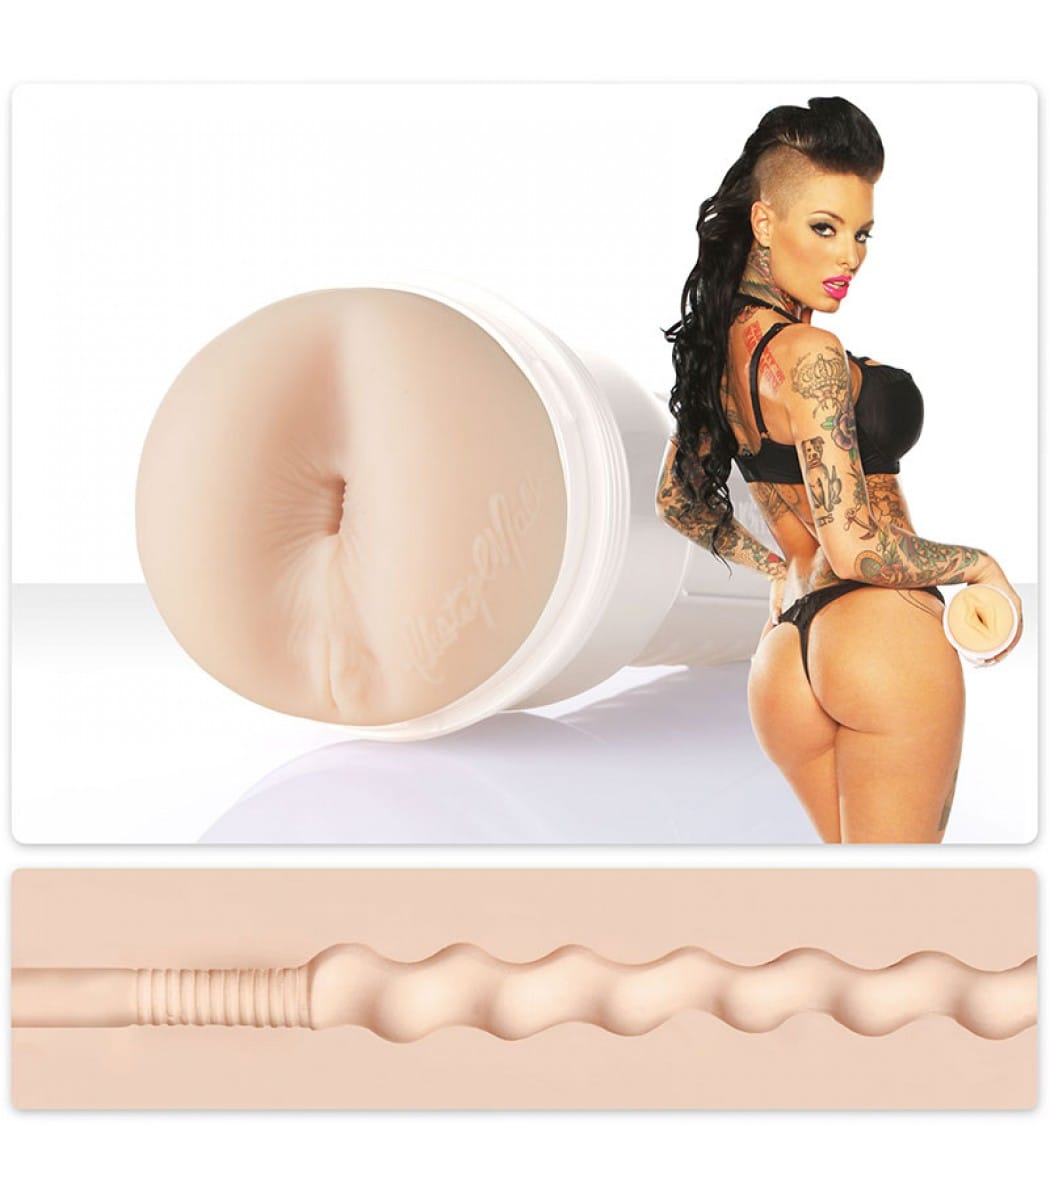 bashiir cabdulaahi recommends christy mack anal dildo pic